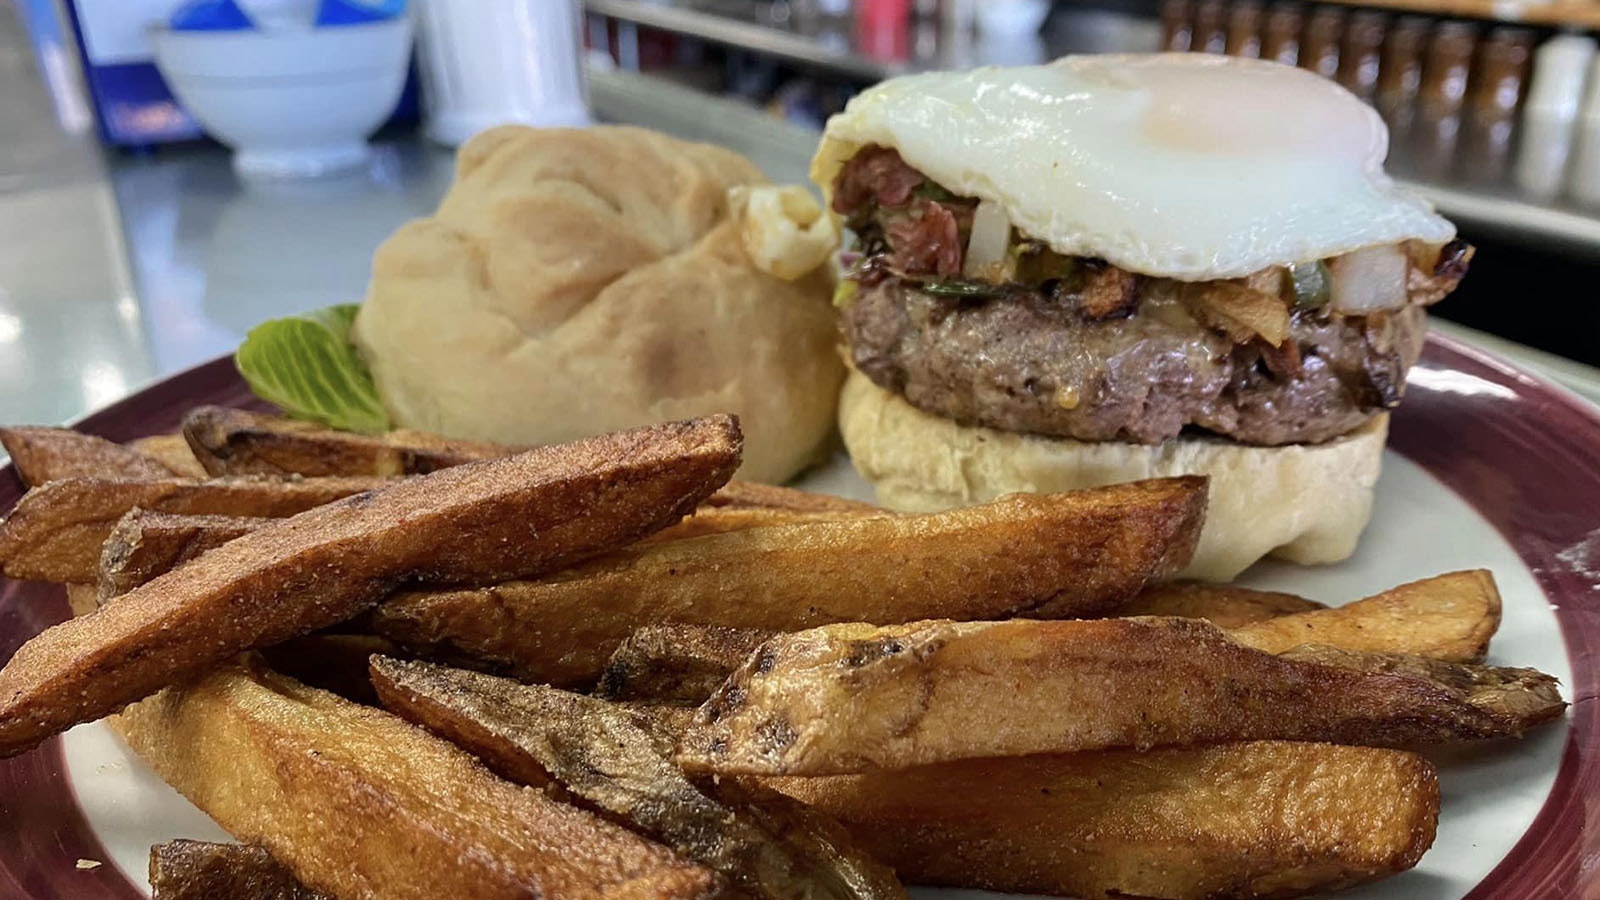 Bob's Diner & Bakery in Greybull, Wyoming, will be featured on the popular "America's Best Restaurant" streaming series.